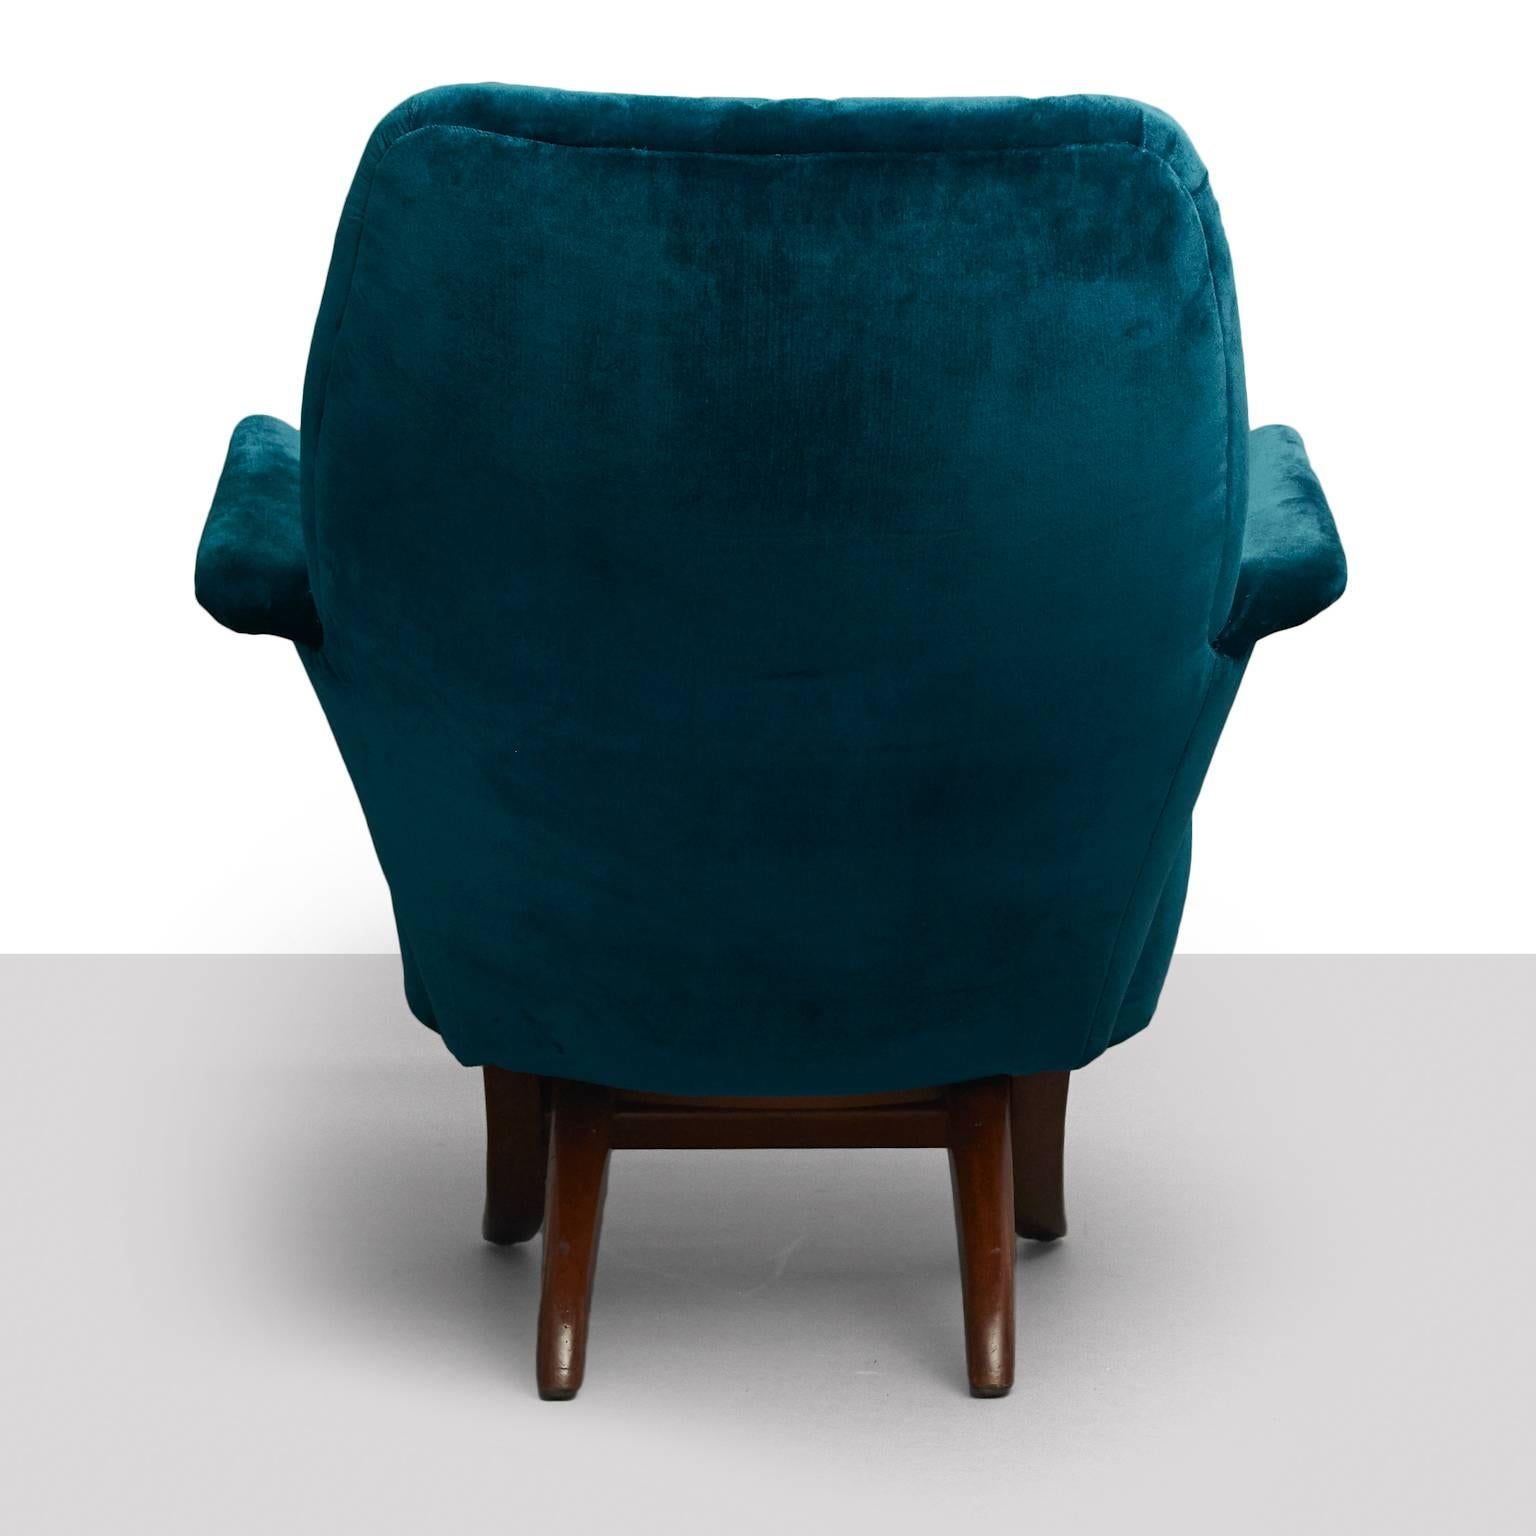 A penguin lounge chair by Theo Ruth for Artifort. A modular design comprised of two interlocking pieces, seat and back can separate. Newly restored in a peacock colored silk velvet, with two covered buttons and legs of mahogany.